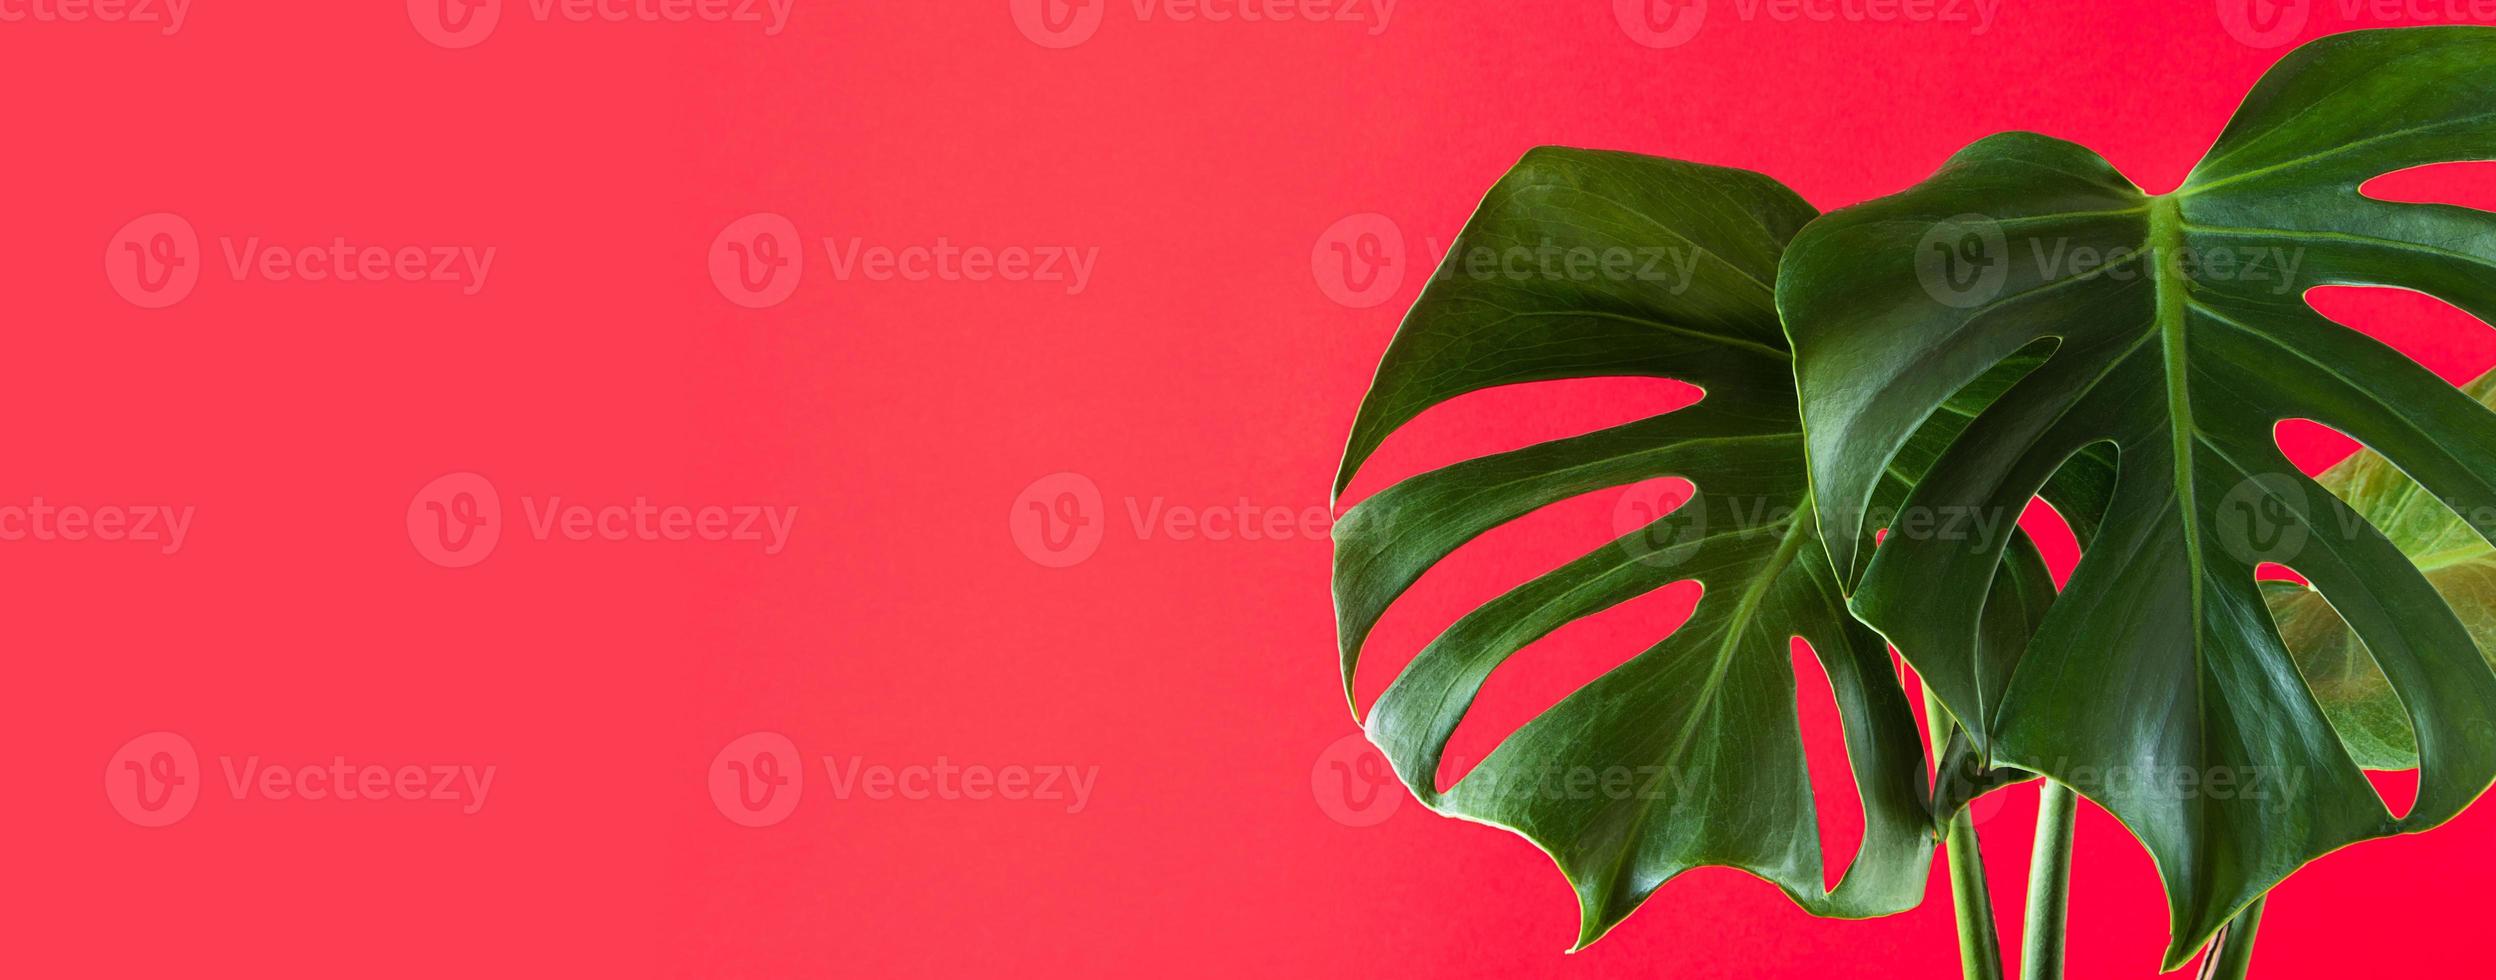 Green leaves of monstera deliciosa on colorful pink background photo